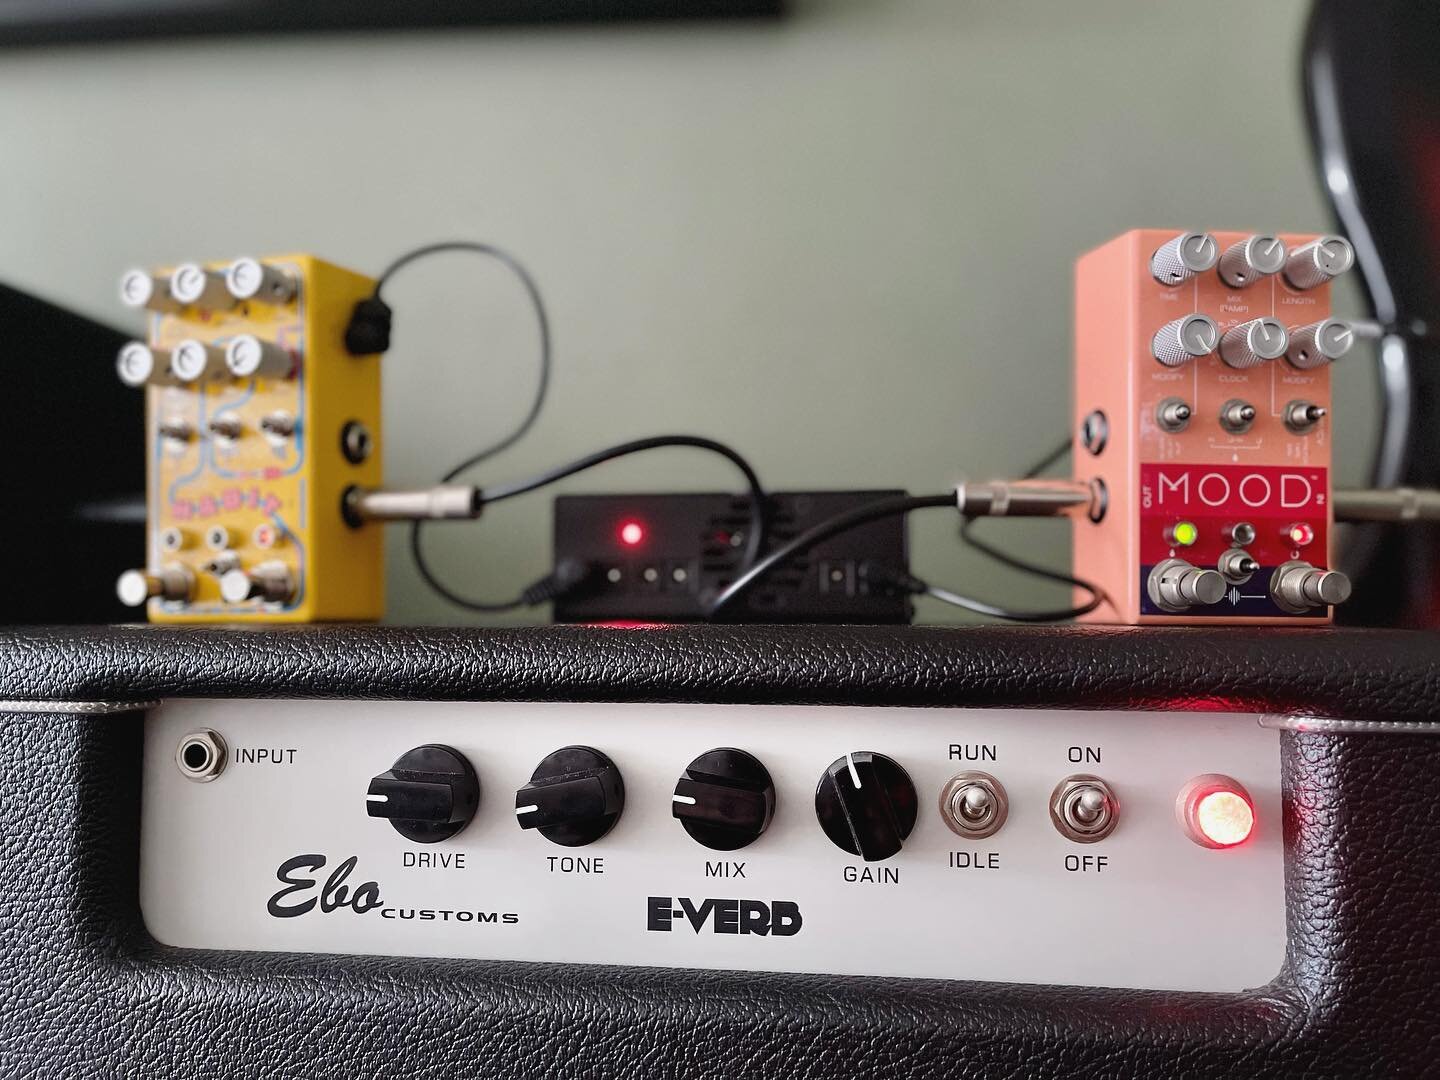 The music held captive in these tools&hellip; 🤯👾🤖👾
@chasebliss #chaseblissaudio #chaseblisshabit #chaseblissmood #soundstrack #score #sounddesign #soundscape #sound #ebocustoms #everb